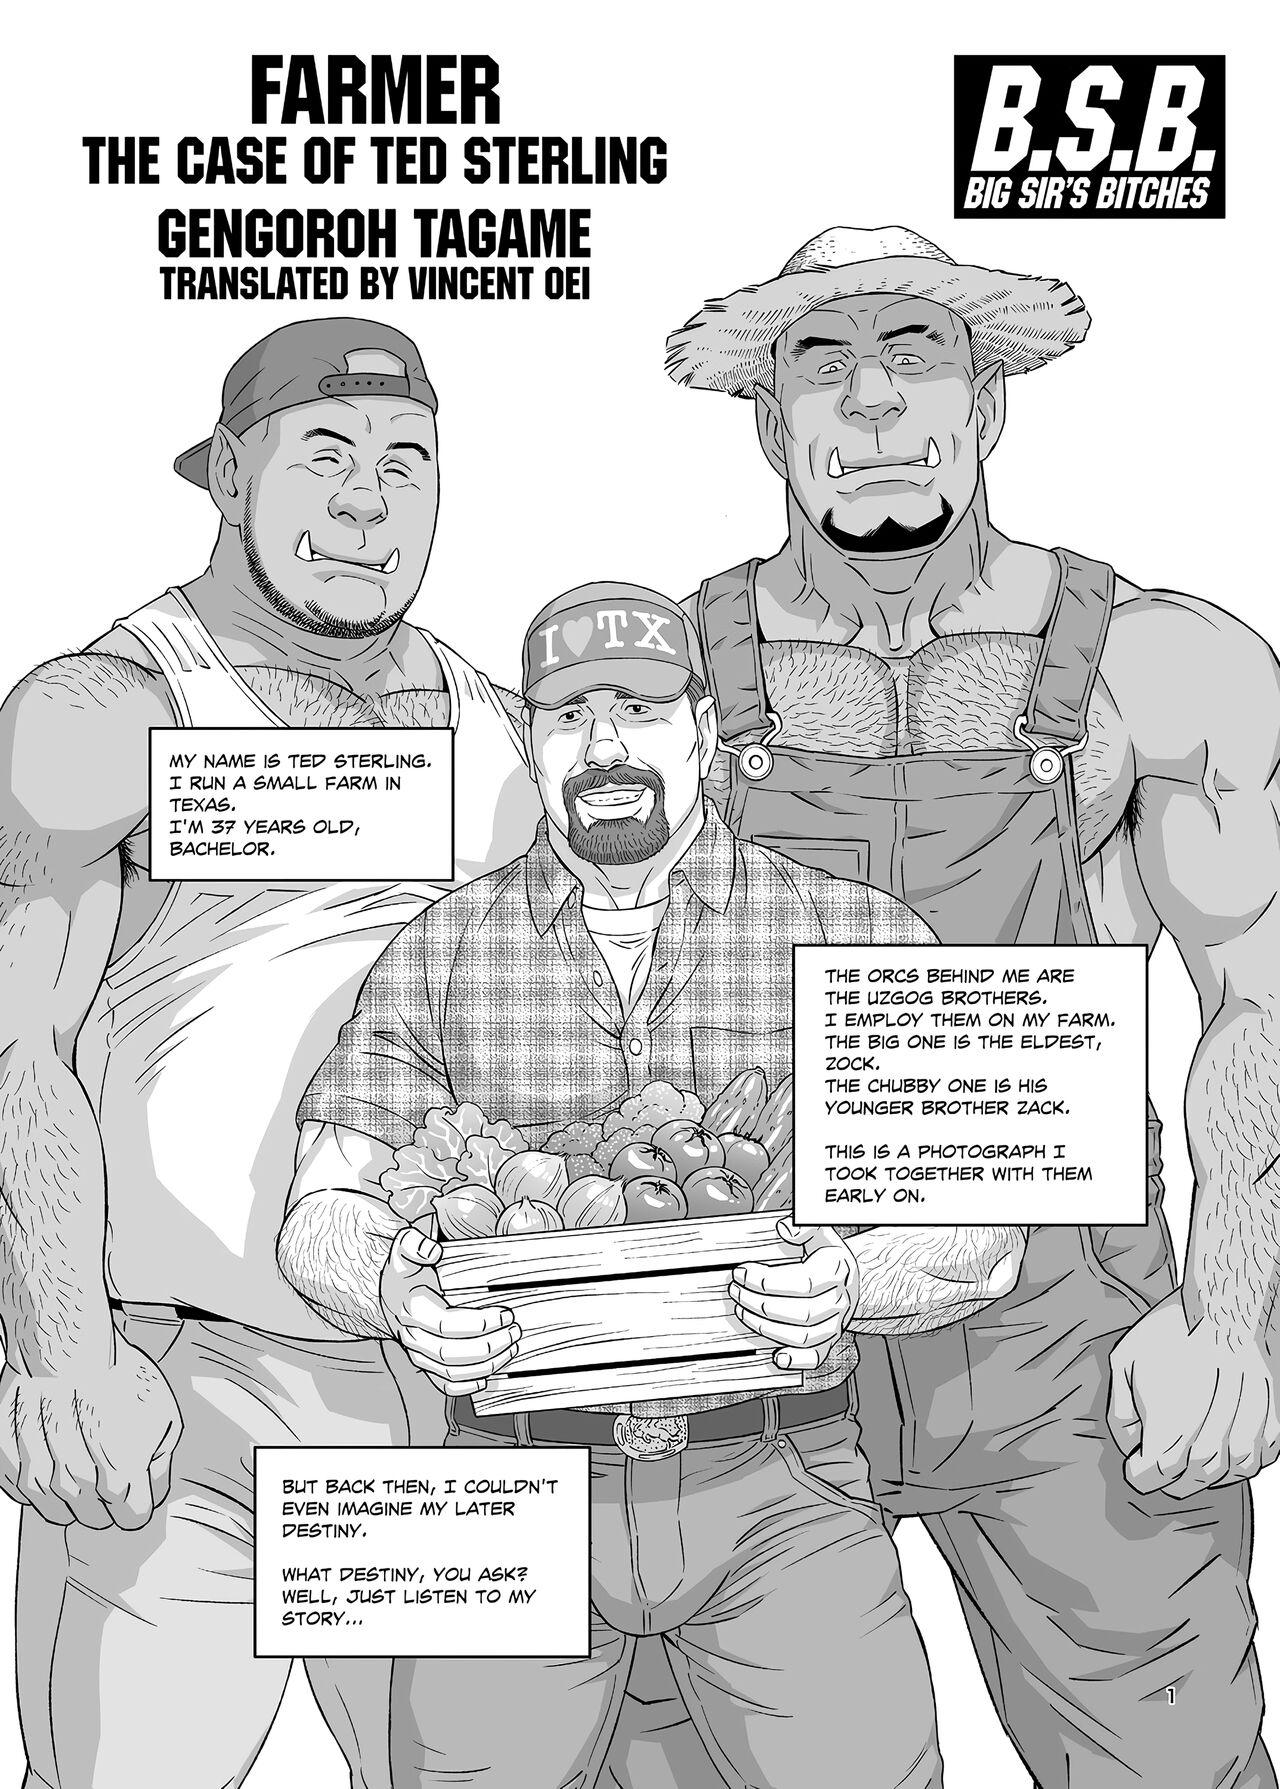 Hermosa Tagame Gengoroh] B.S.B. Big Sir's Bitches : A Farmer - In the Case of Ted Sterling - Original Milf Fuck - Page 2